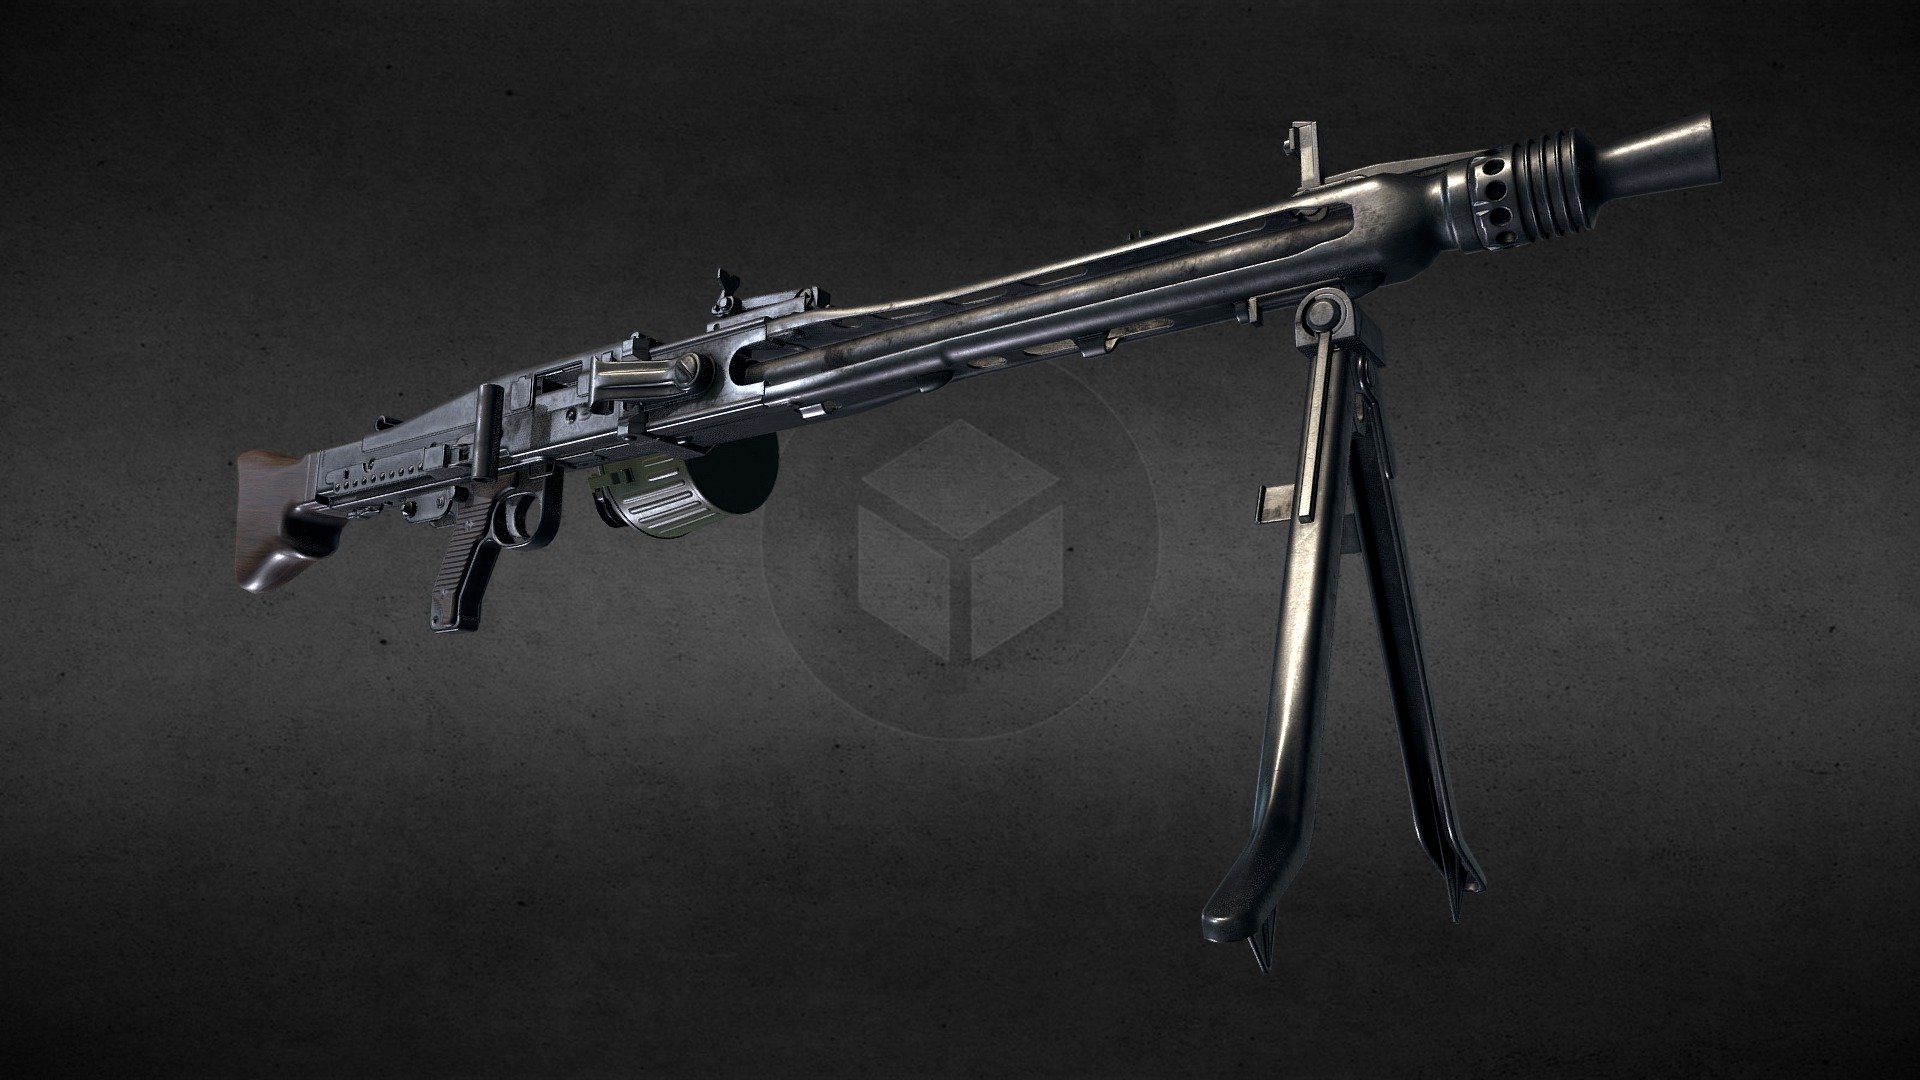 A lowpoly PBR MG42. The model is split into separate parts with proper hierarchy, ready to be rigged and animated. Both Metallic/Roughness and Specular/Glossiness texture sets are provided in 4k for the gun, and 2k for the drum magazine.

Full model and high res textures are in the additional files archive.

Model parts:

Frame,

Barrel,

Cover,

Trigger,

Hammer,

Safety,

Sight,

Sight Muzzle,

Sight Adjustment,

Bipod Base,

Bipod Left,

Bipod Right,

Barrle Change Flap,

Barrle Change Latch,

Dust Cover,

Drum,

Drum Top,

Drum Cover,

Drum Handle,

Drum Lock

Following textures are provided:

Ambient Occlusion,

Base Color,

Diffuse,

Glossiness,

Metallic,

Metallic/Roughness (Unity),

Normal (OpenGL),

Normal (DirectX),

Roughness,

Specular - MG42 - 3D model by soidev 3d model